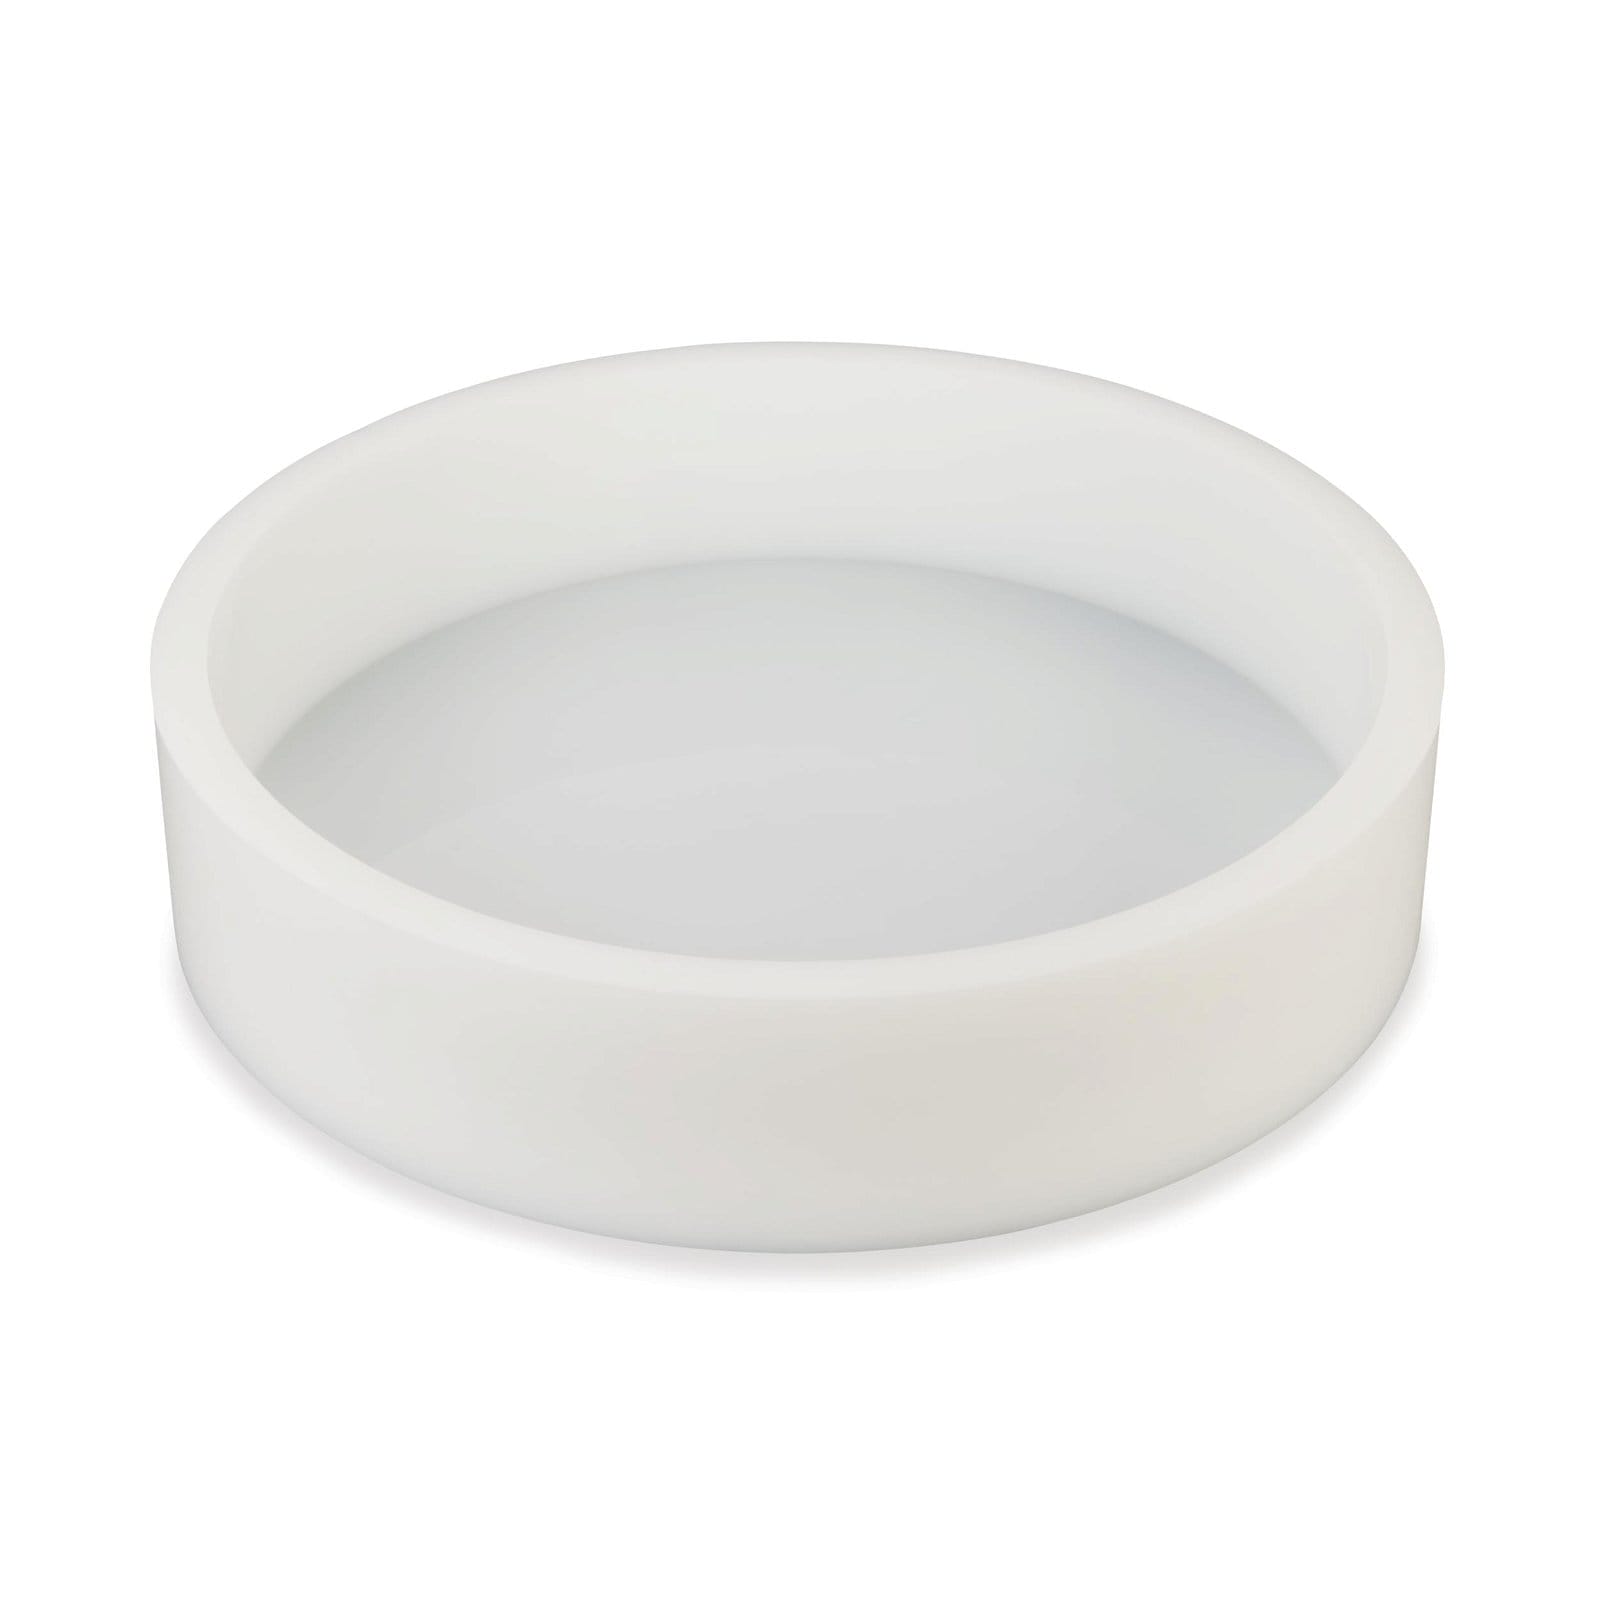 TotalBoat® Silicone Circle Mold - Large - 12-1/2" x 12-1/2" x 2-3/4"